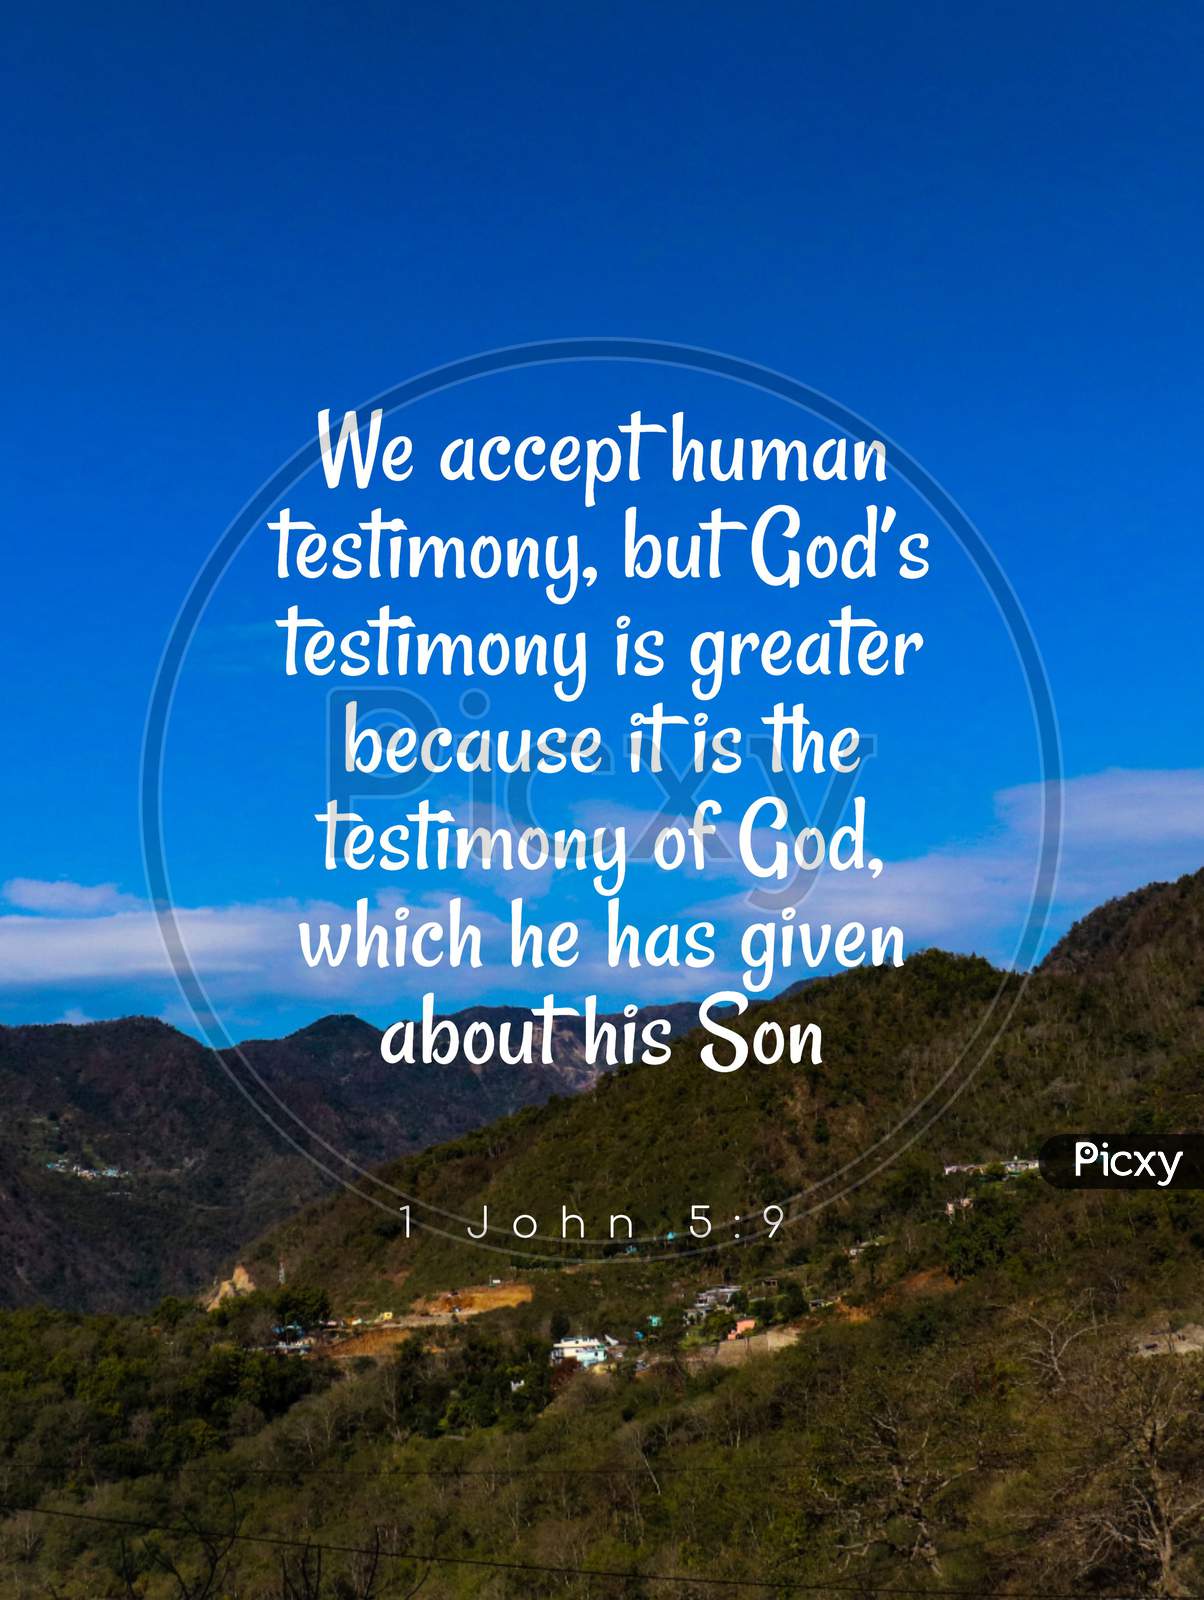 Bible Words 1 John 5:9 " We Accept Human Testimony  But God'S Testimony Is Greater Because It Is The Testimony Of God Which He Has Given About His Son "